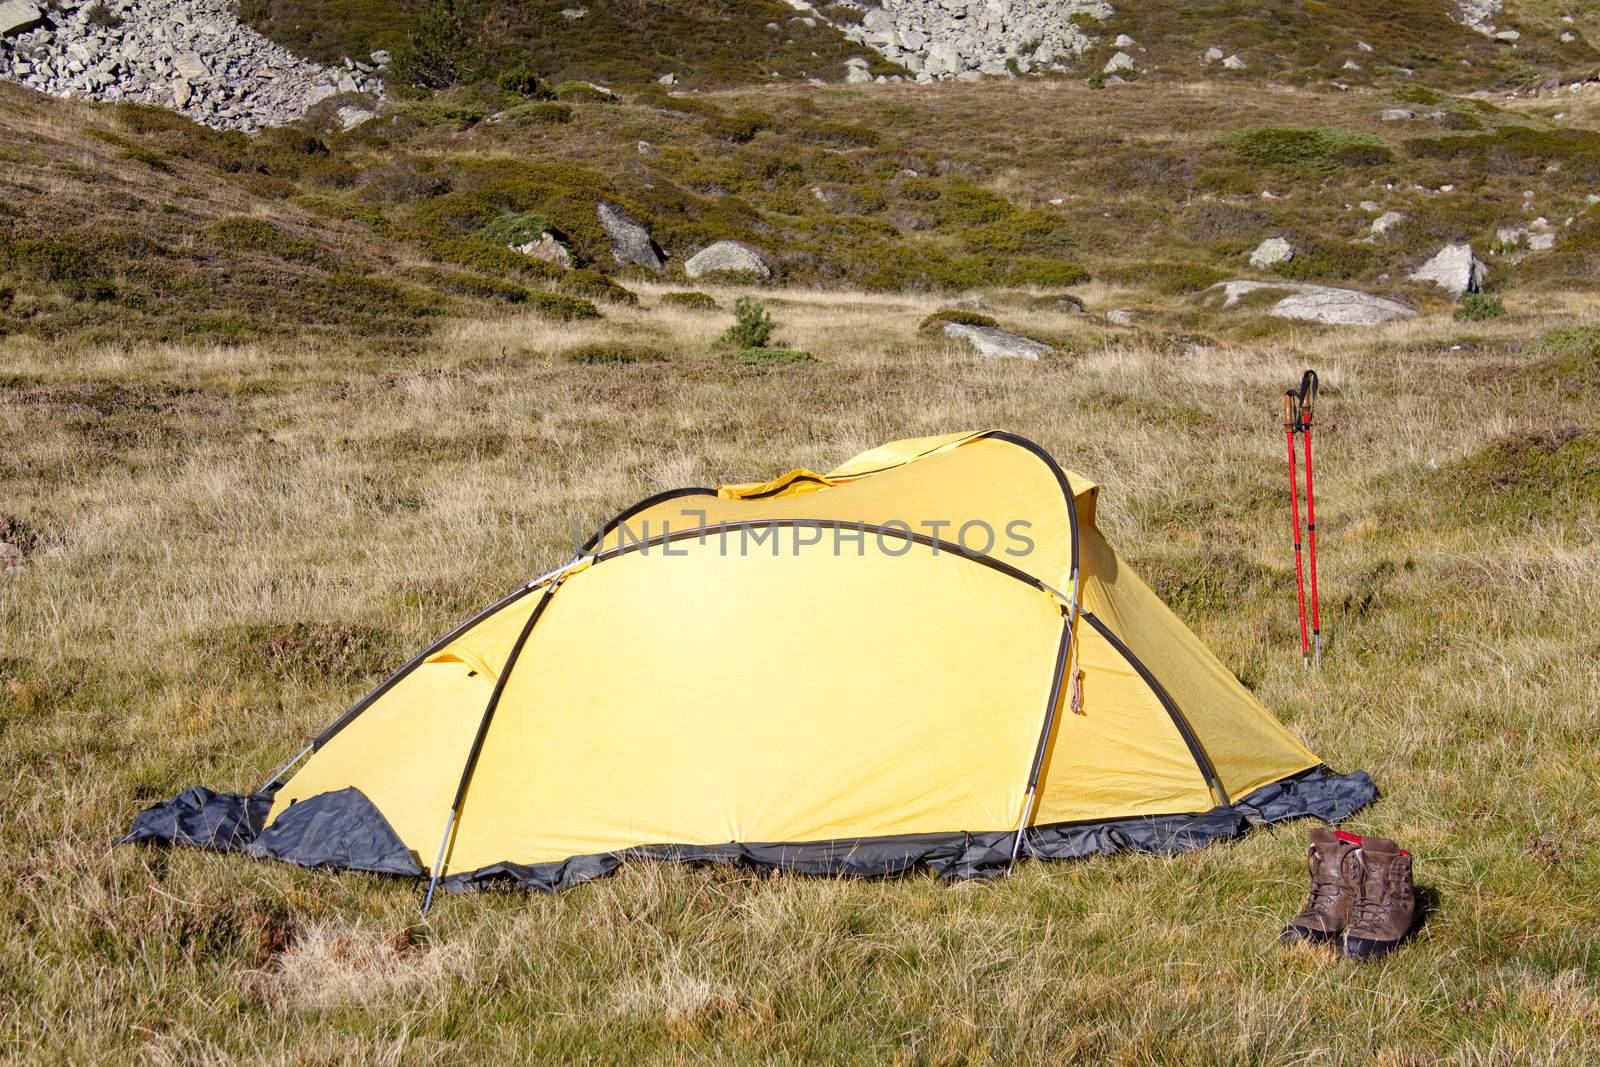 Camp in Pyrenees mountain in Andora. Small yellow tent